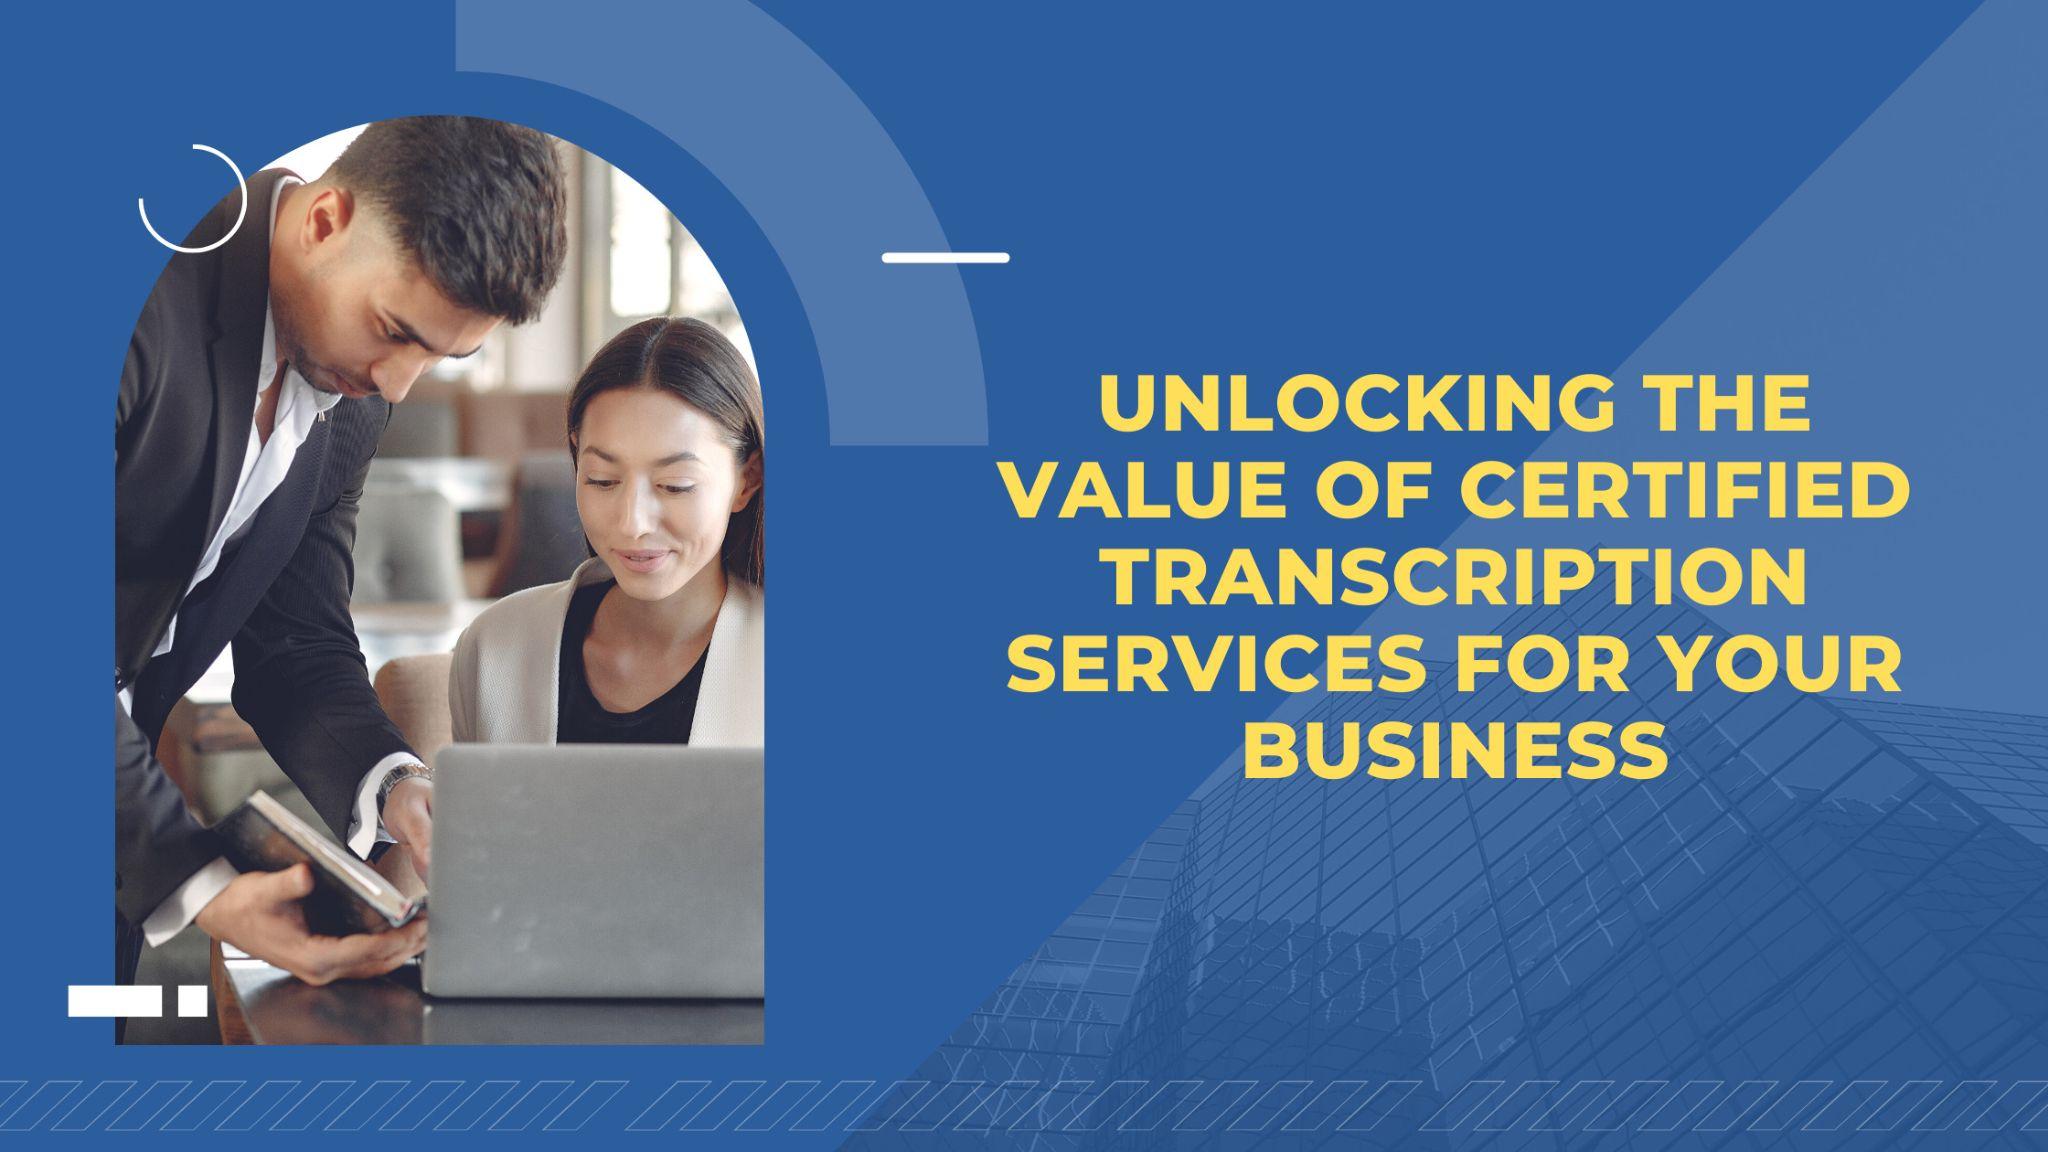 Importance of Certified Transcription Services for Your Business